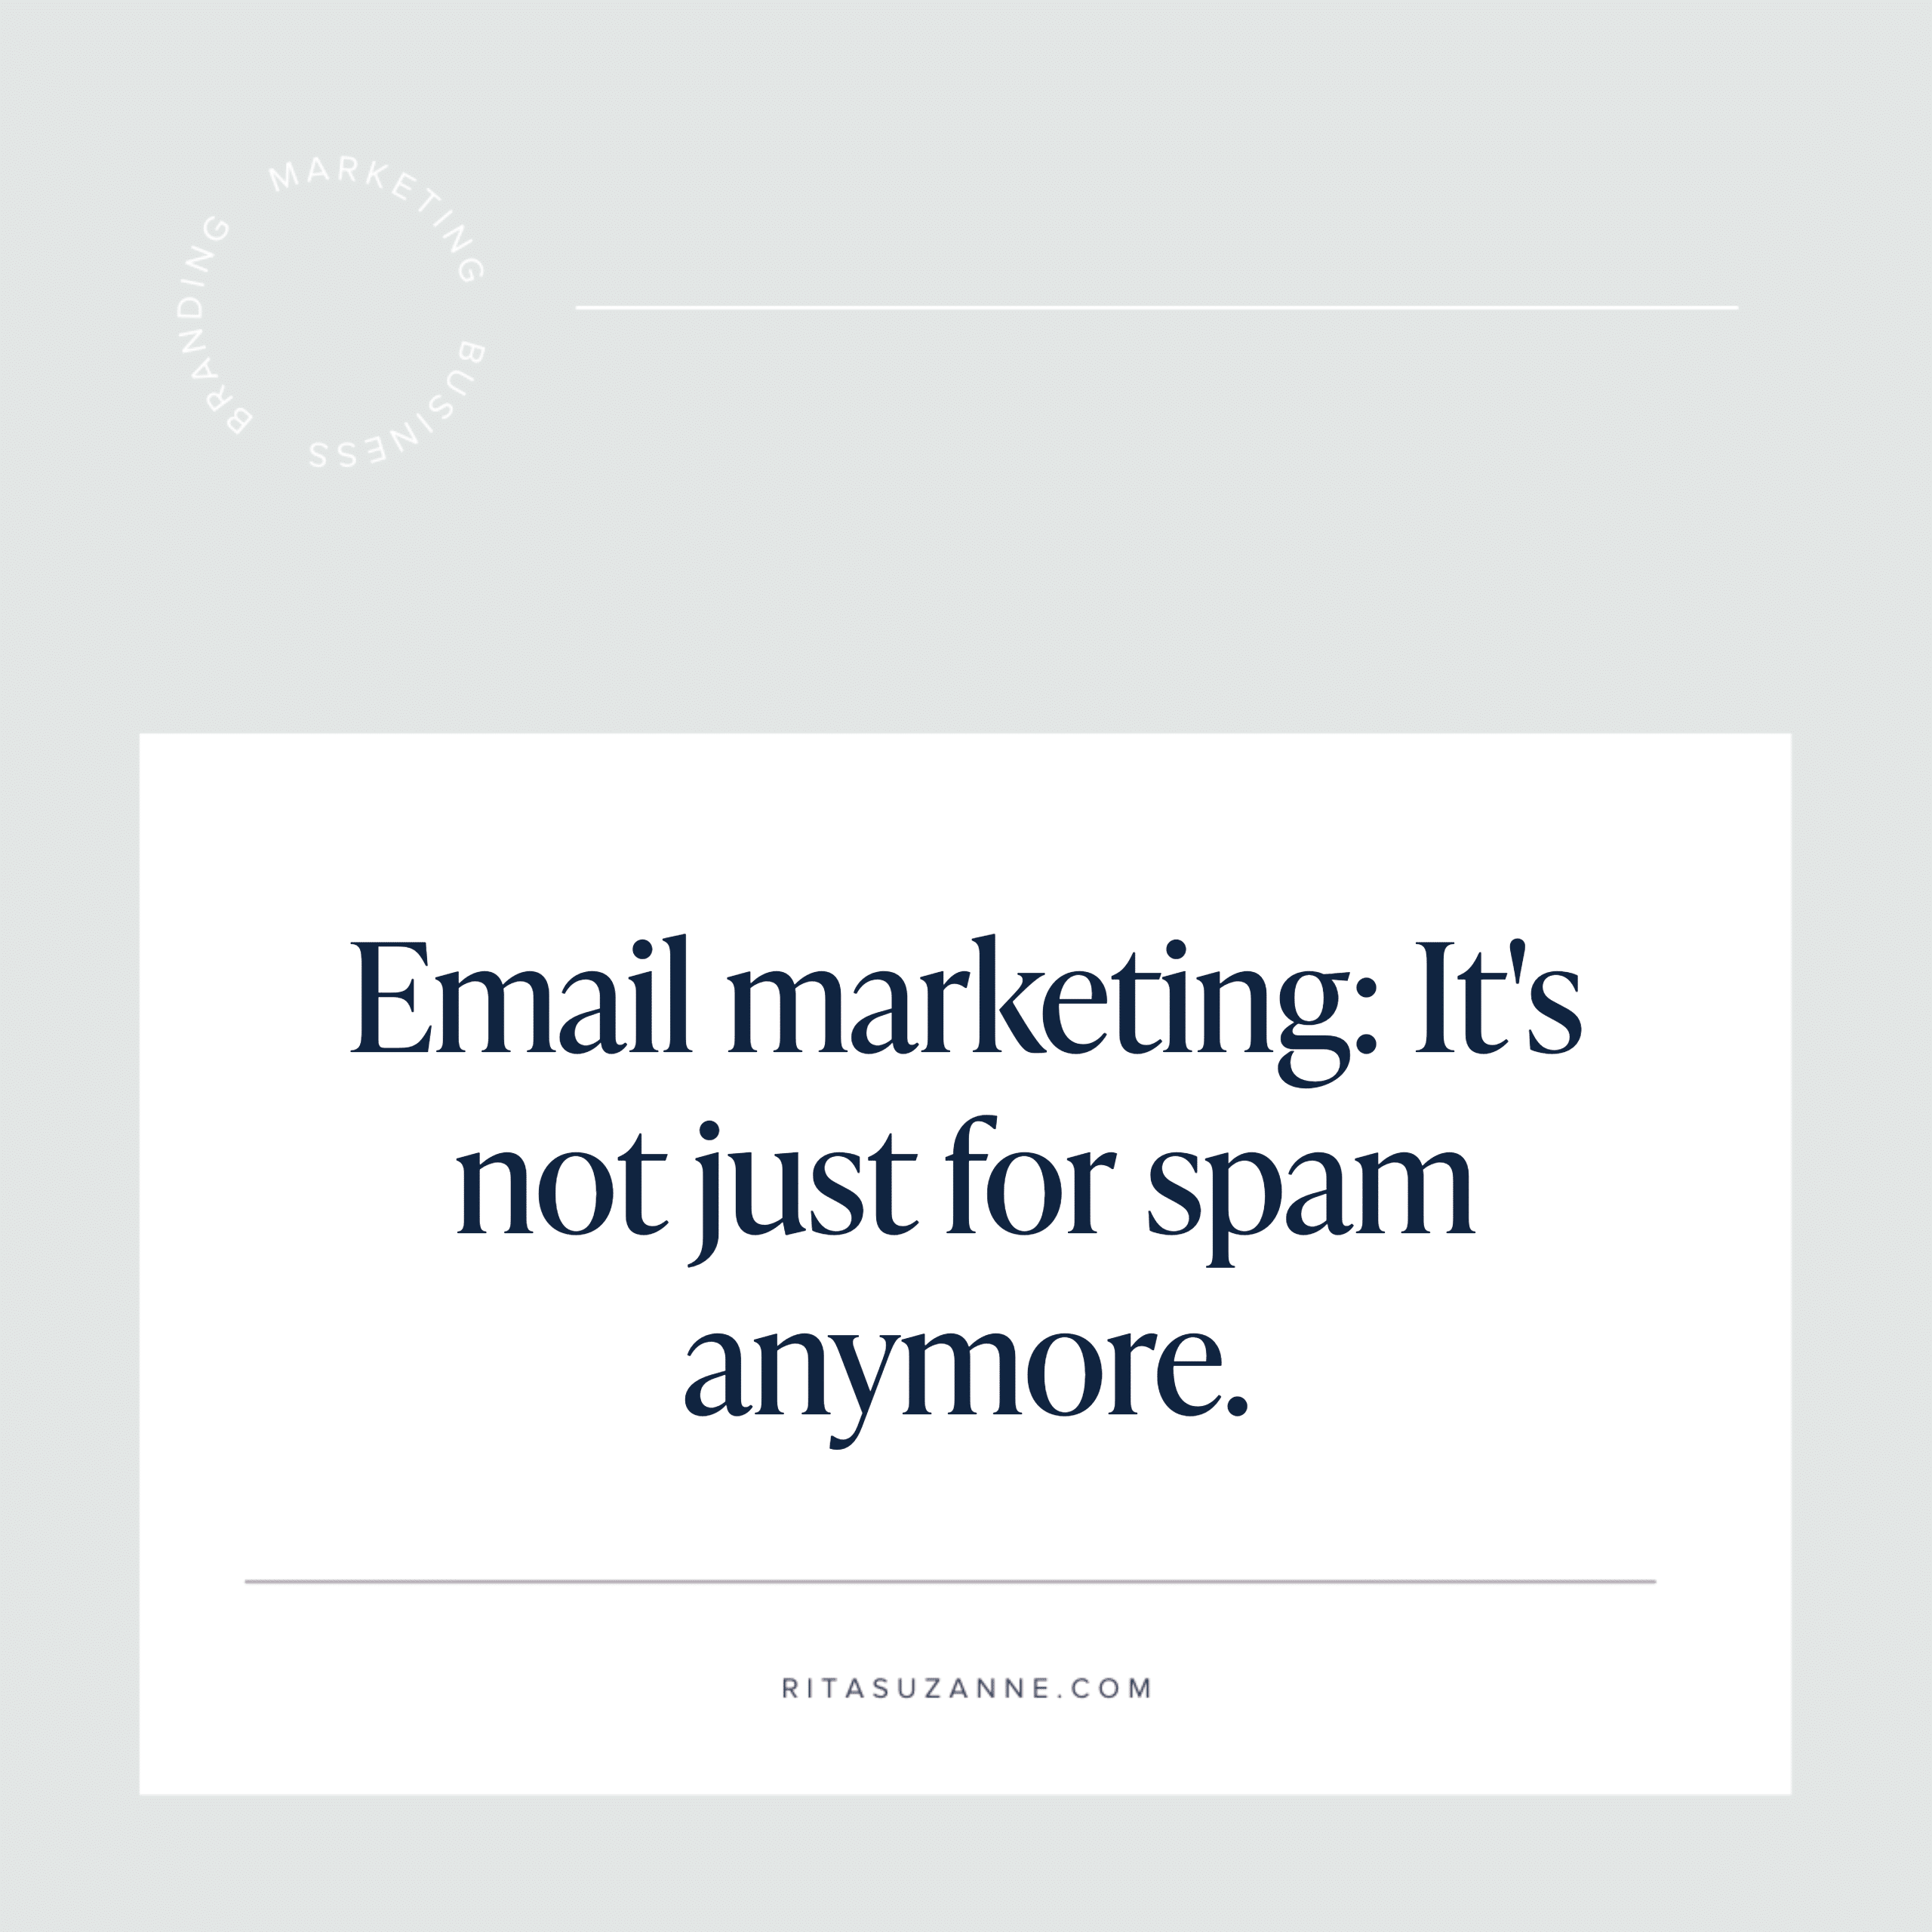 3 Email Marketing Mistakes (And How to Fix Them)